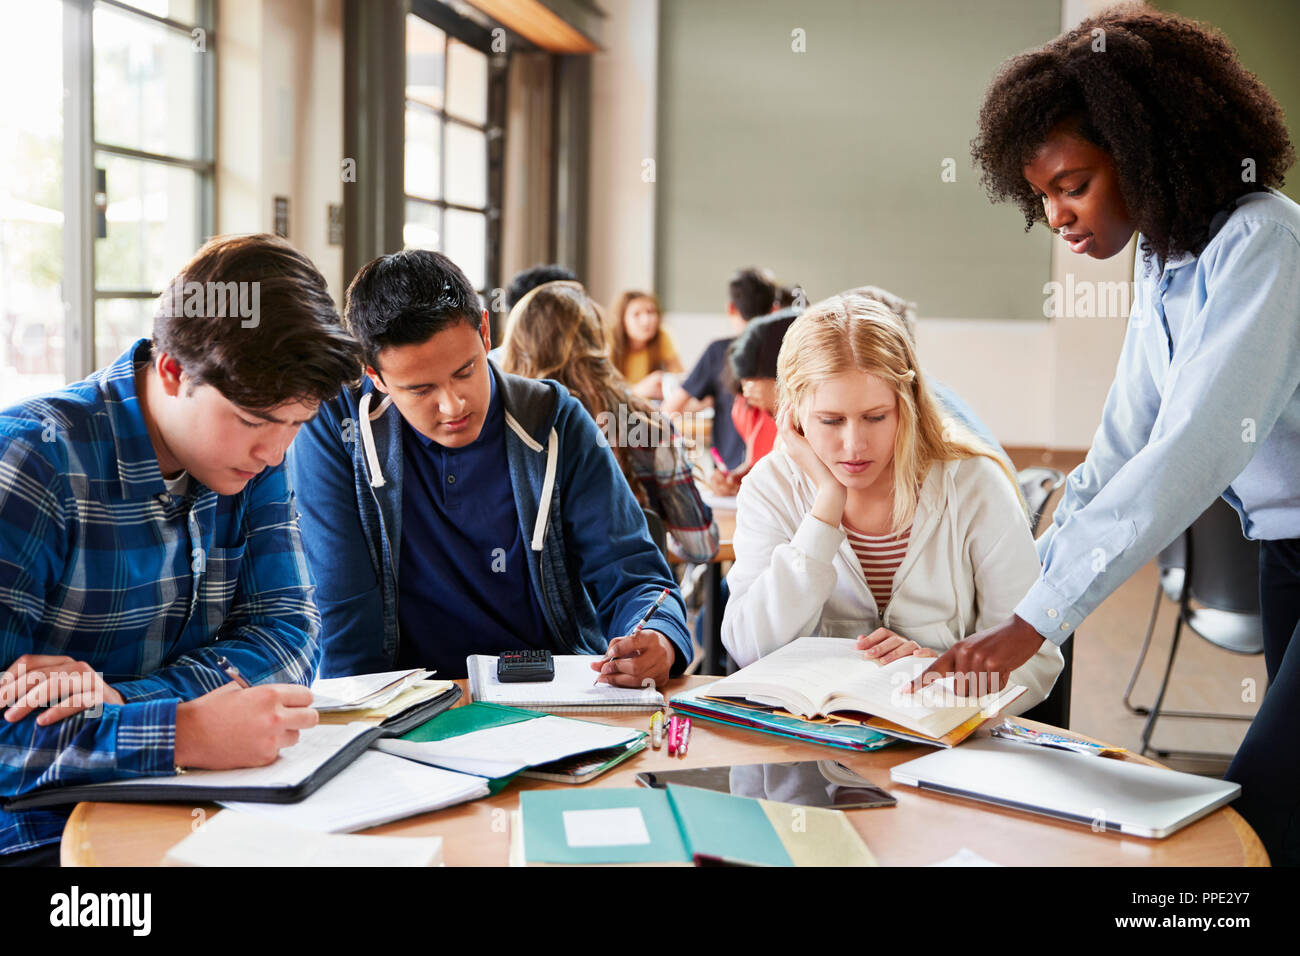 Group Of High School Students With Female Teacher Working At Desk Stock Photo